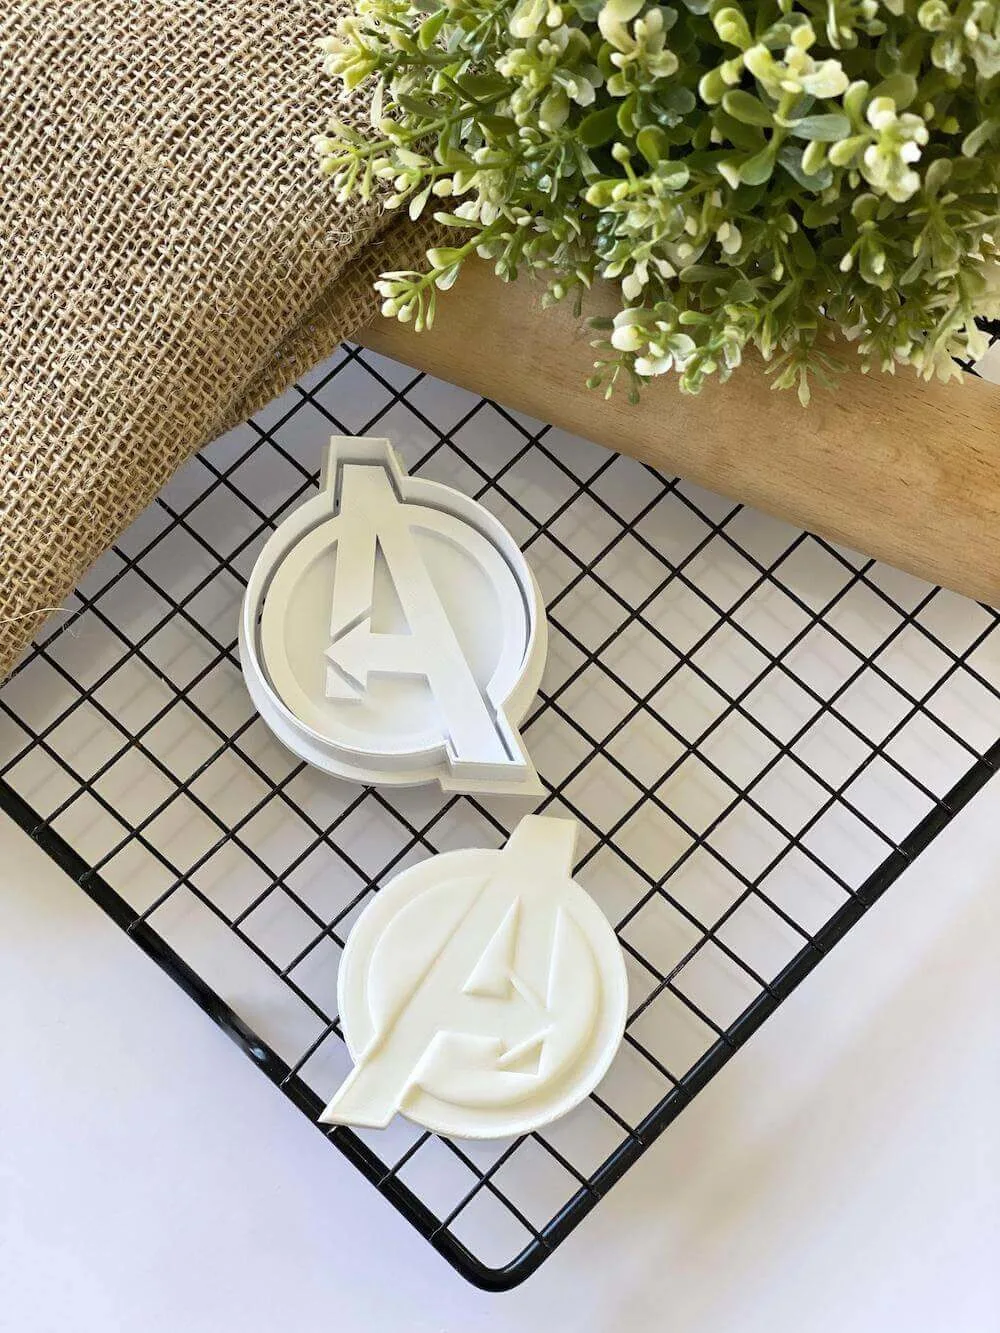 Avengers cookie cutters